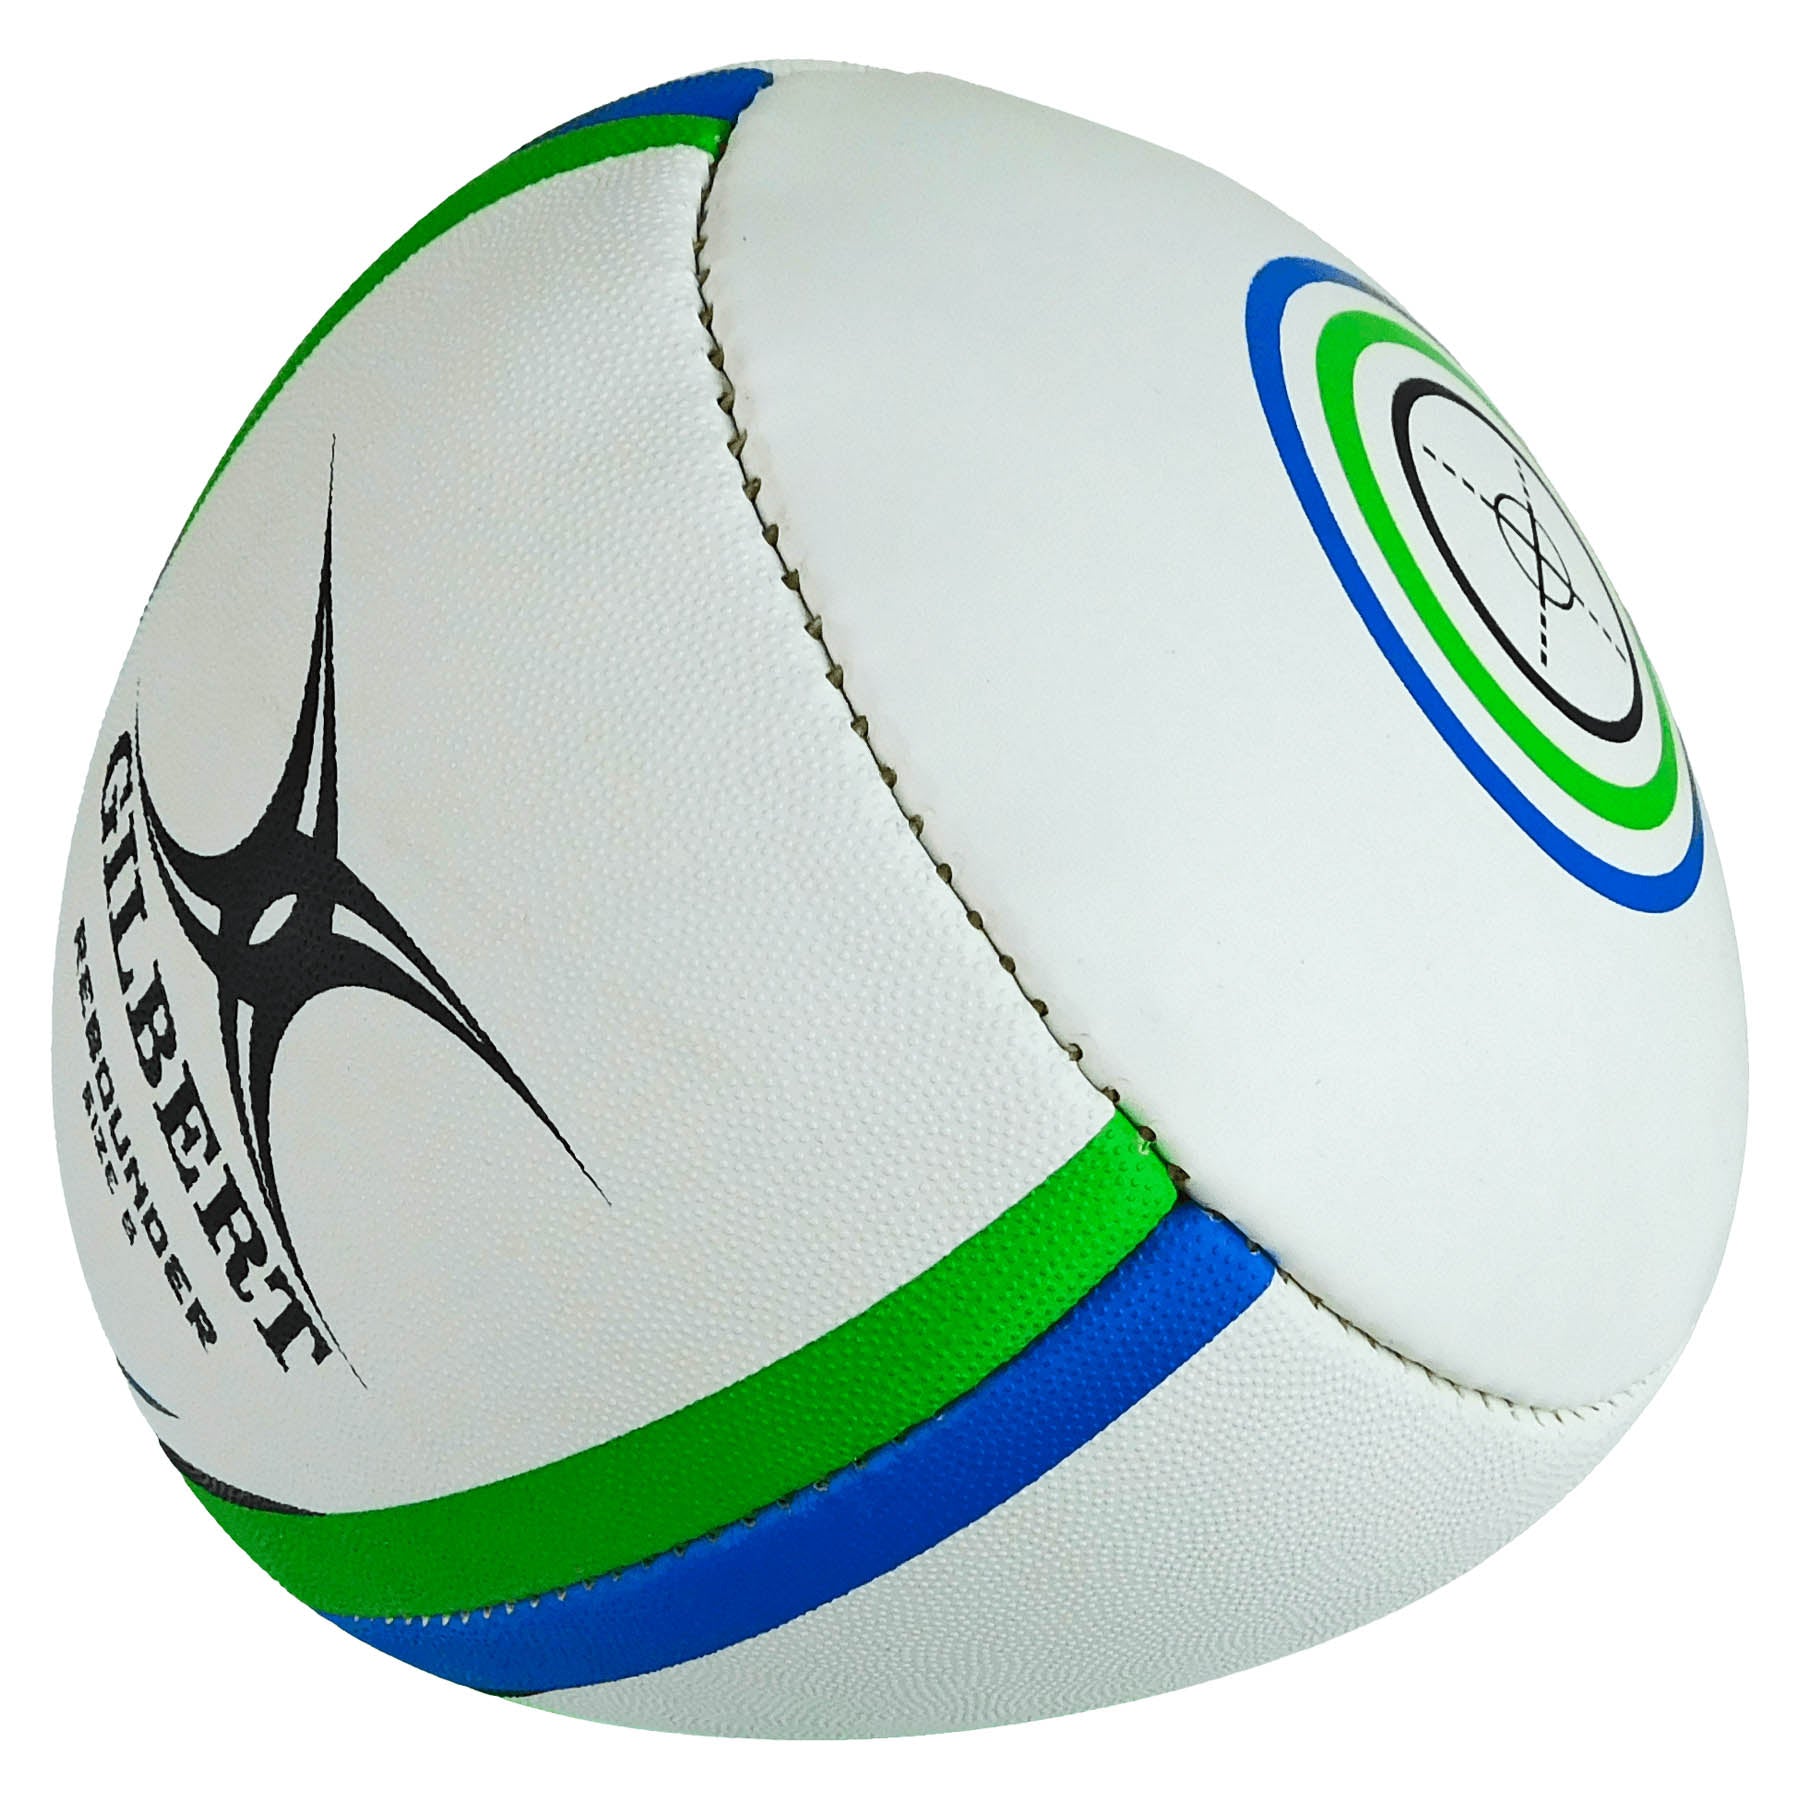 Rugby Imports Gilbert Rebounder Rugby Ball - Junior Size 4